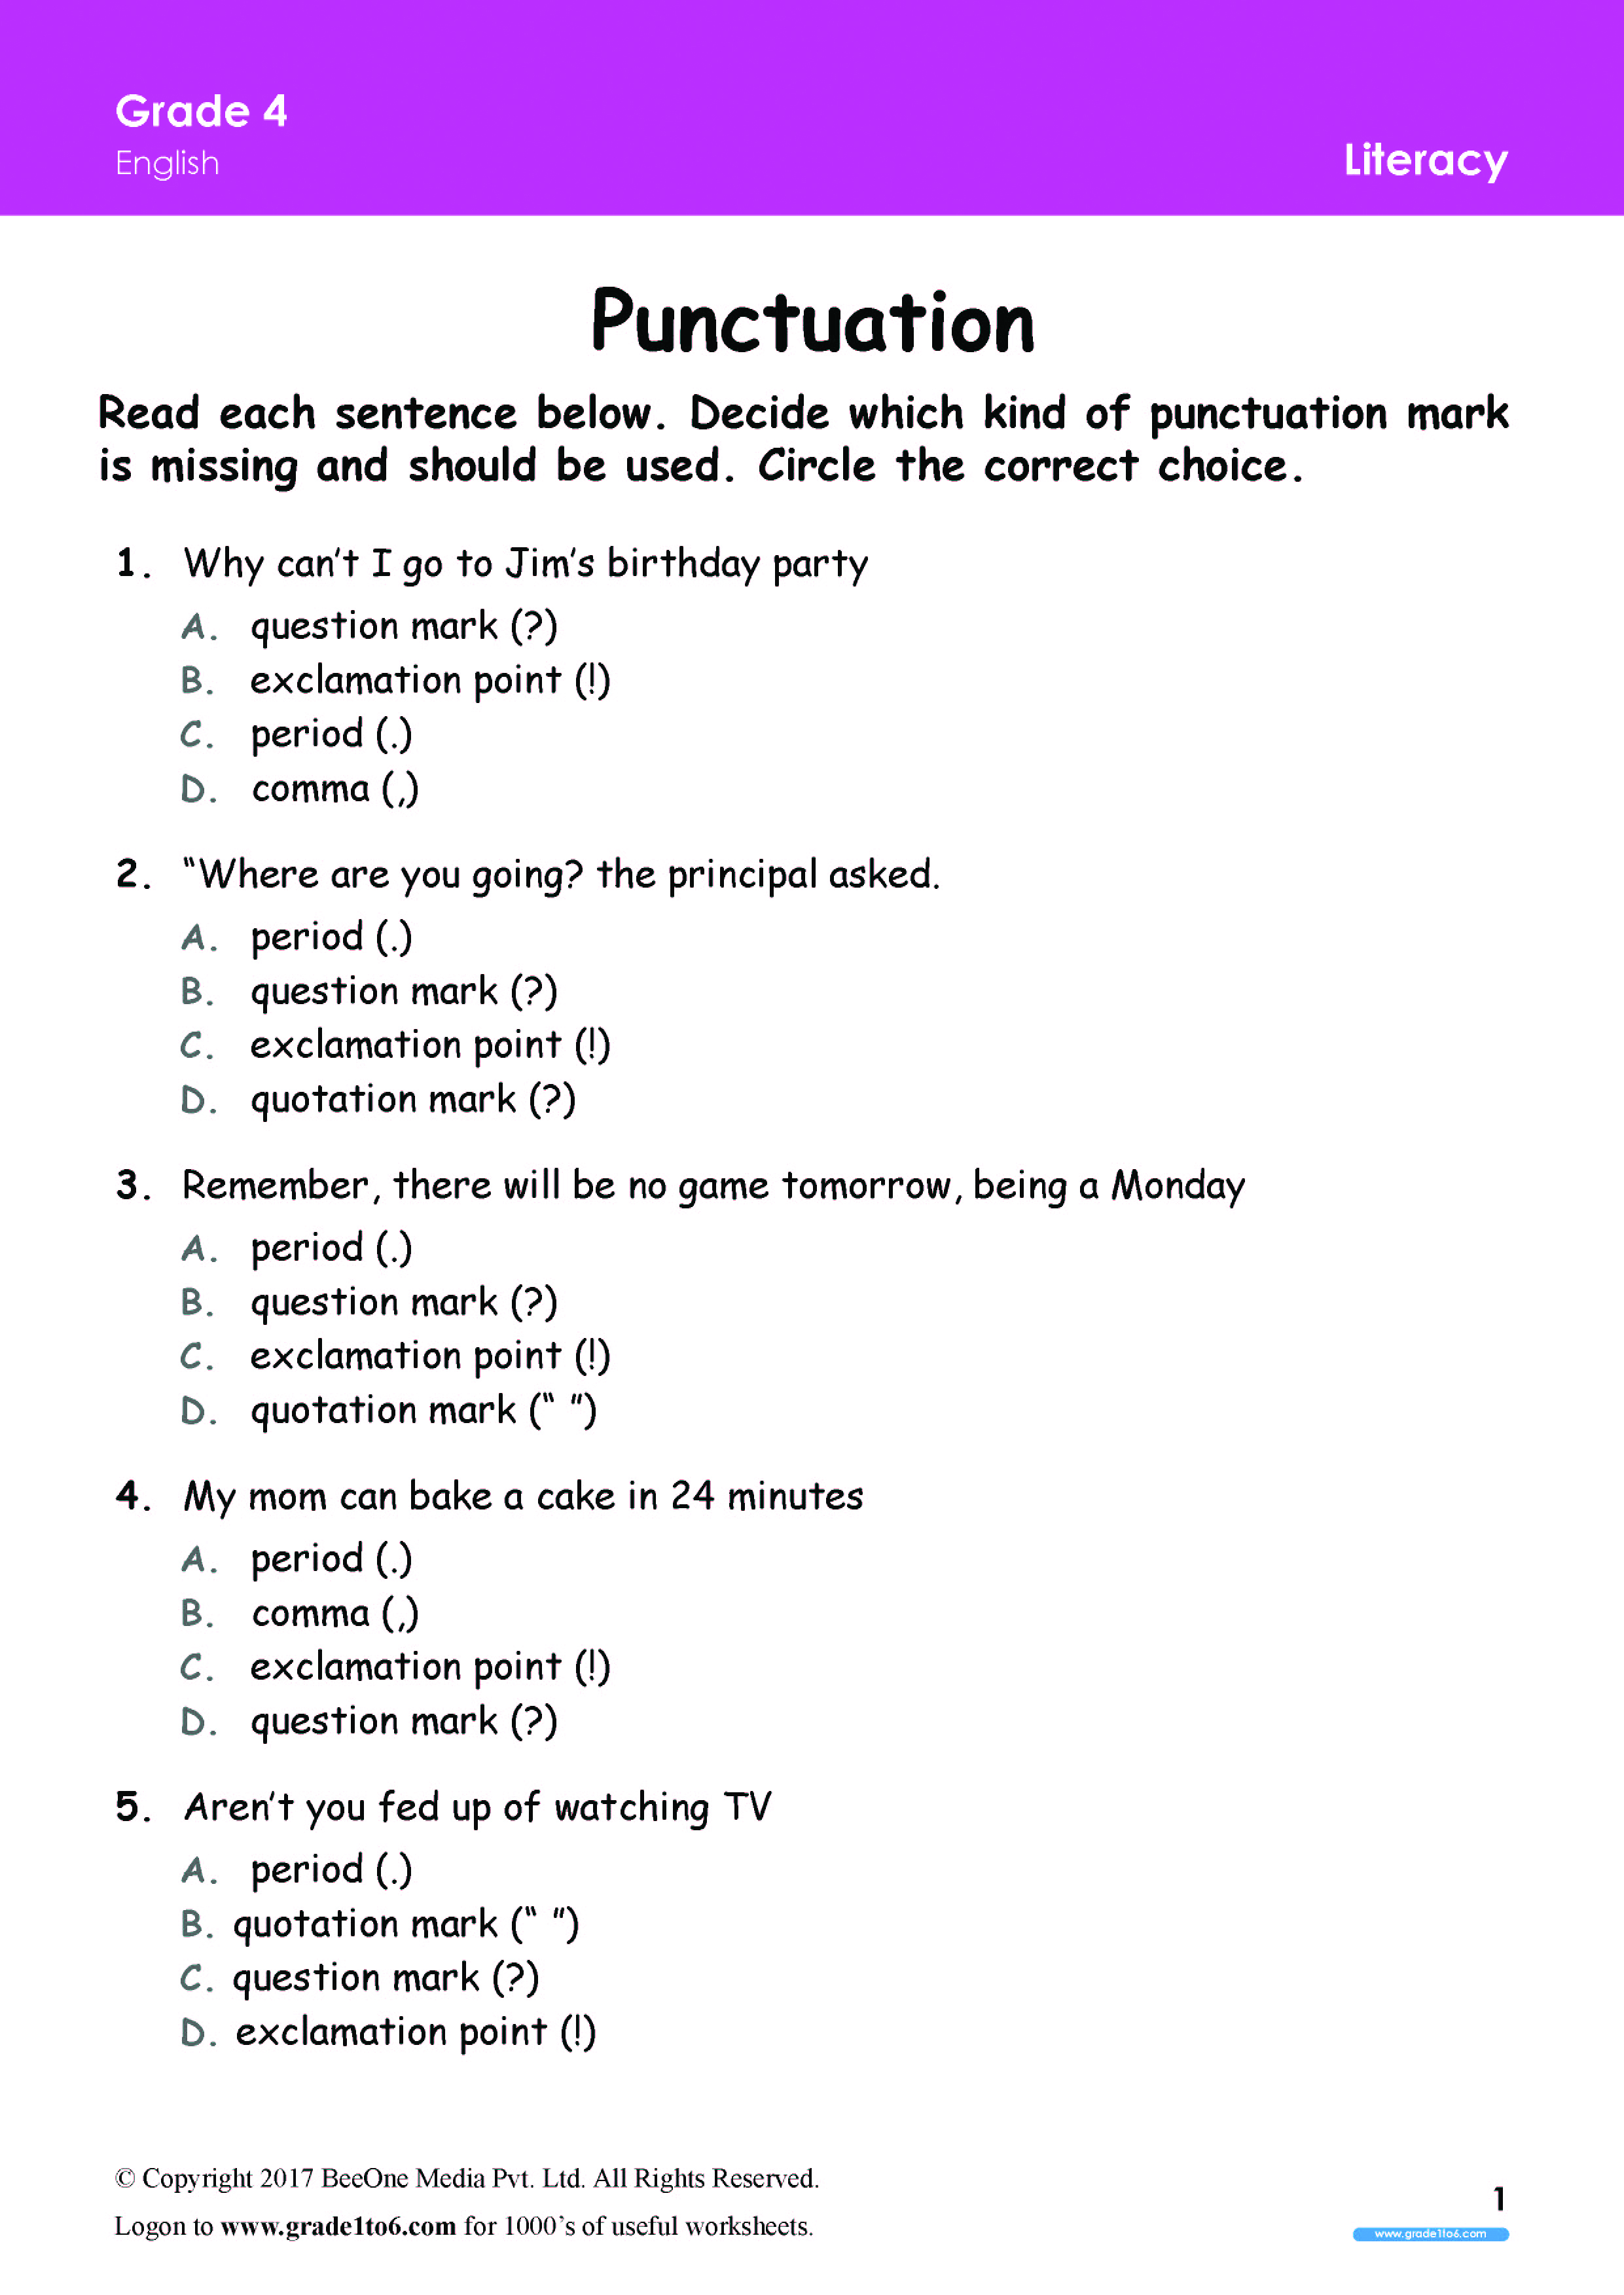 Punctuation Worksheets Grade 4 Www Grade1to6 Com